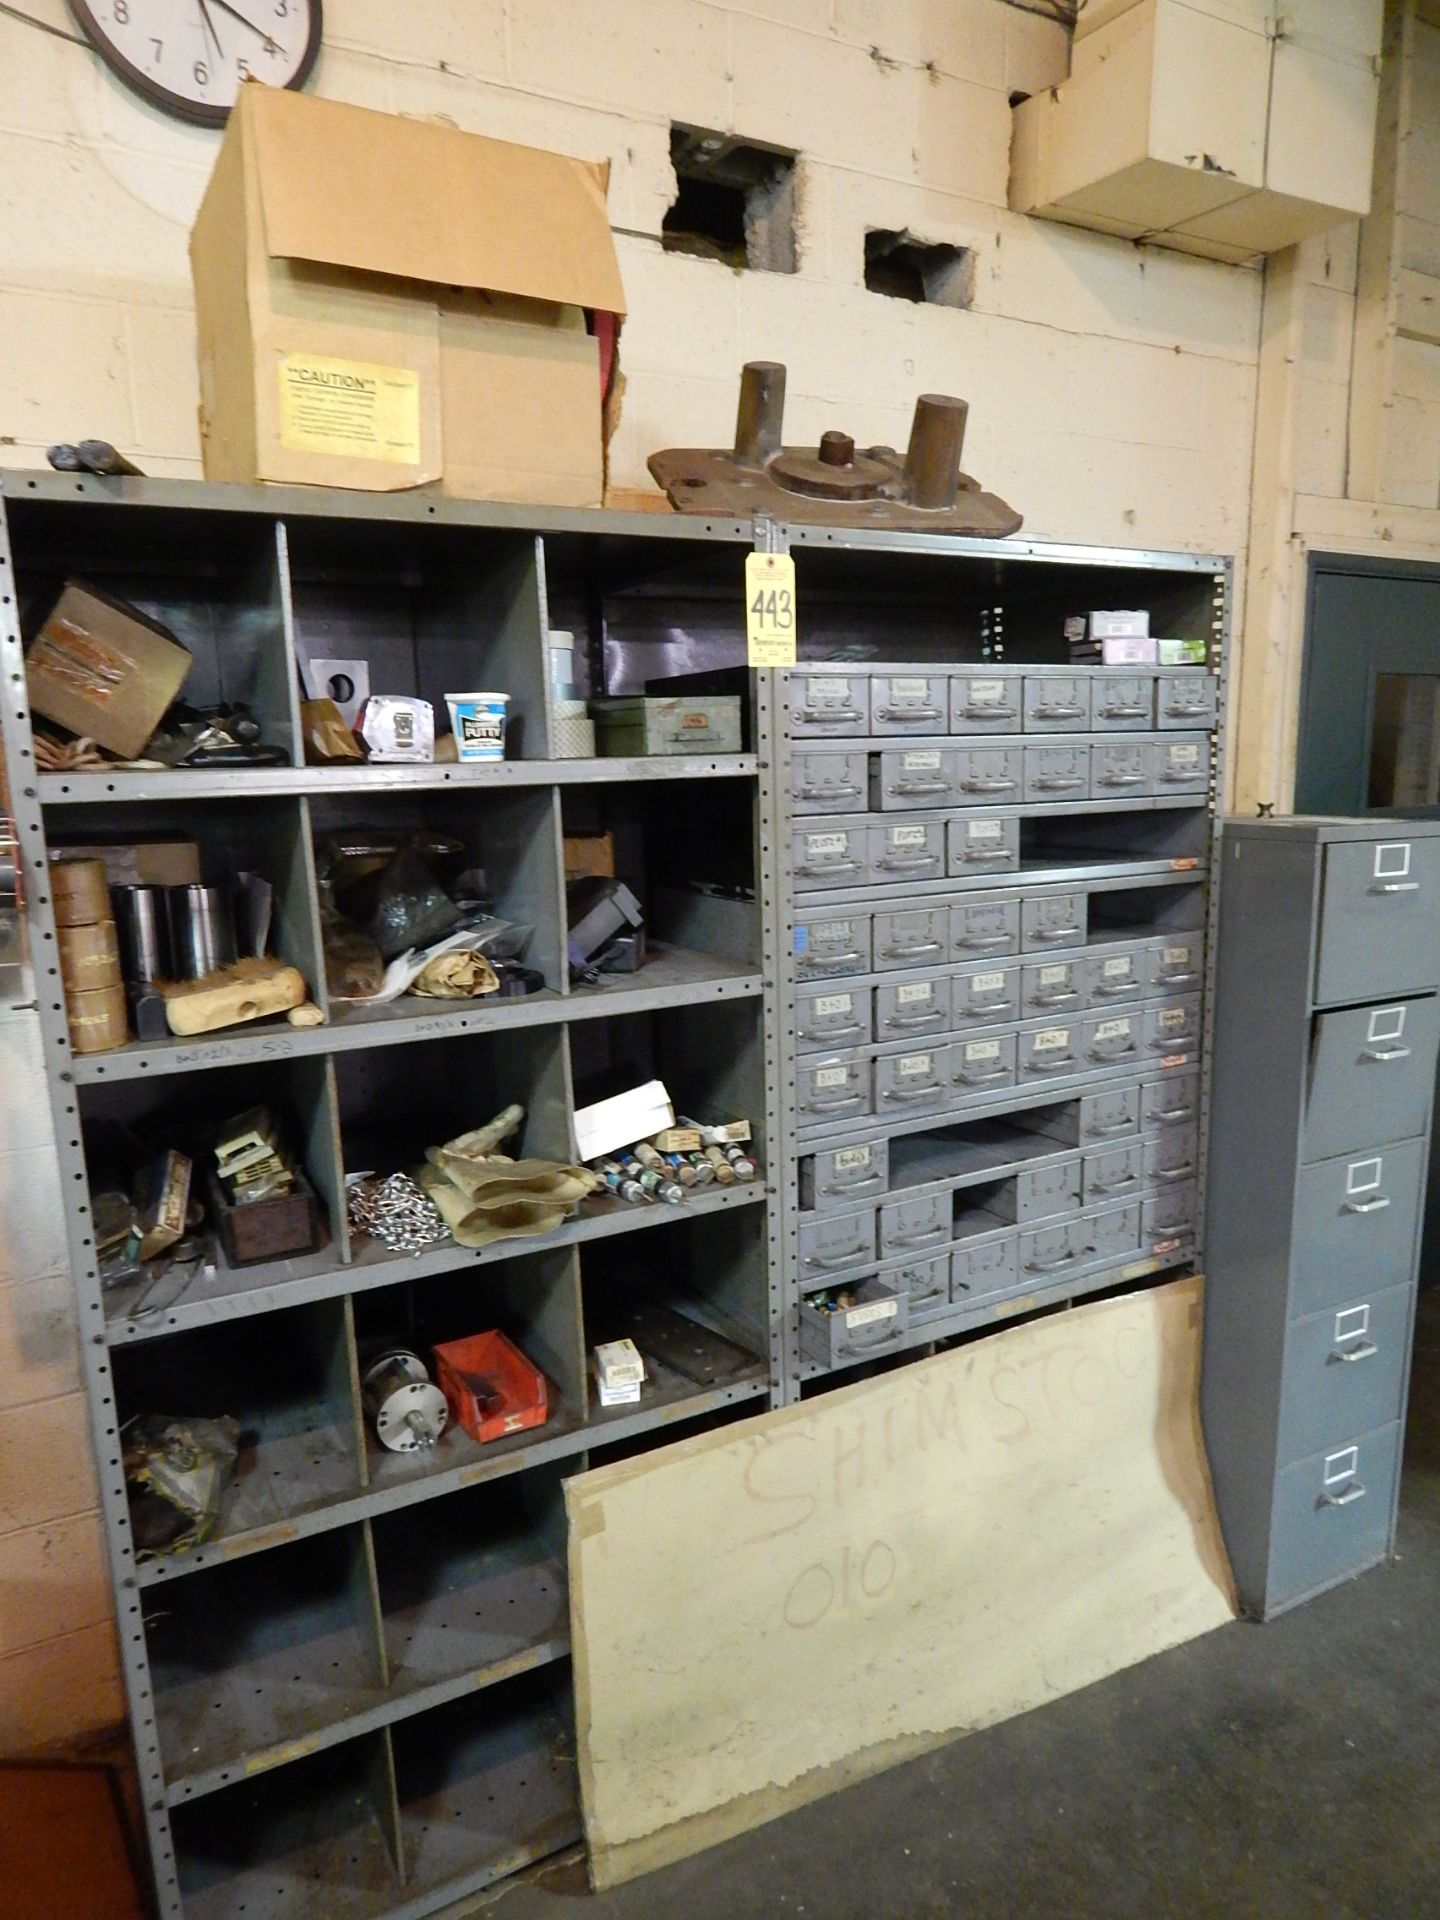 Shelving, 5-Drawer File, Note: No Contents. Shevling and File only, contents in photo not included - Image 2 of 4